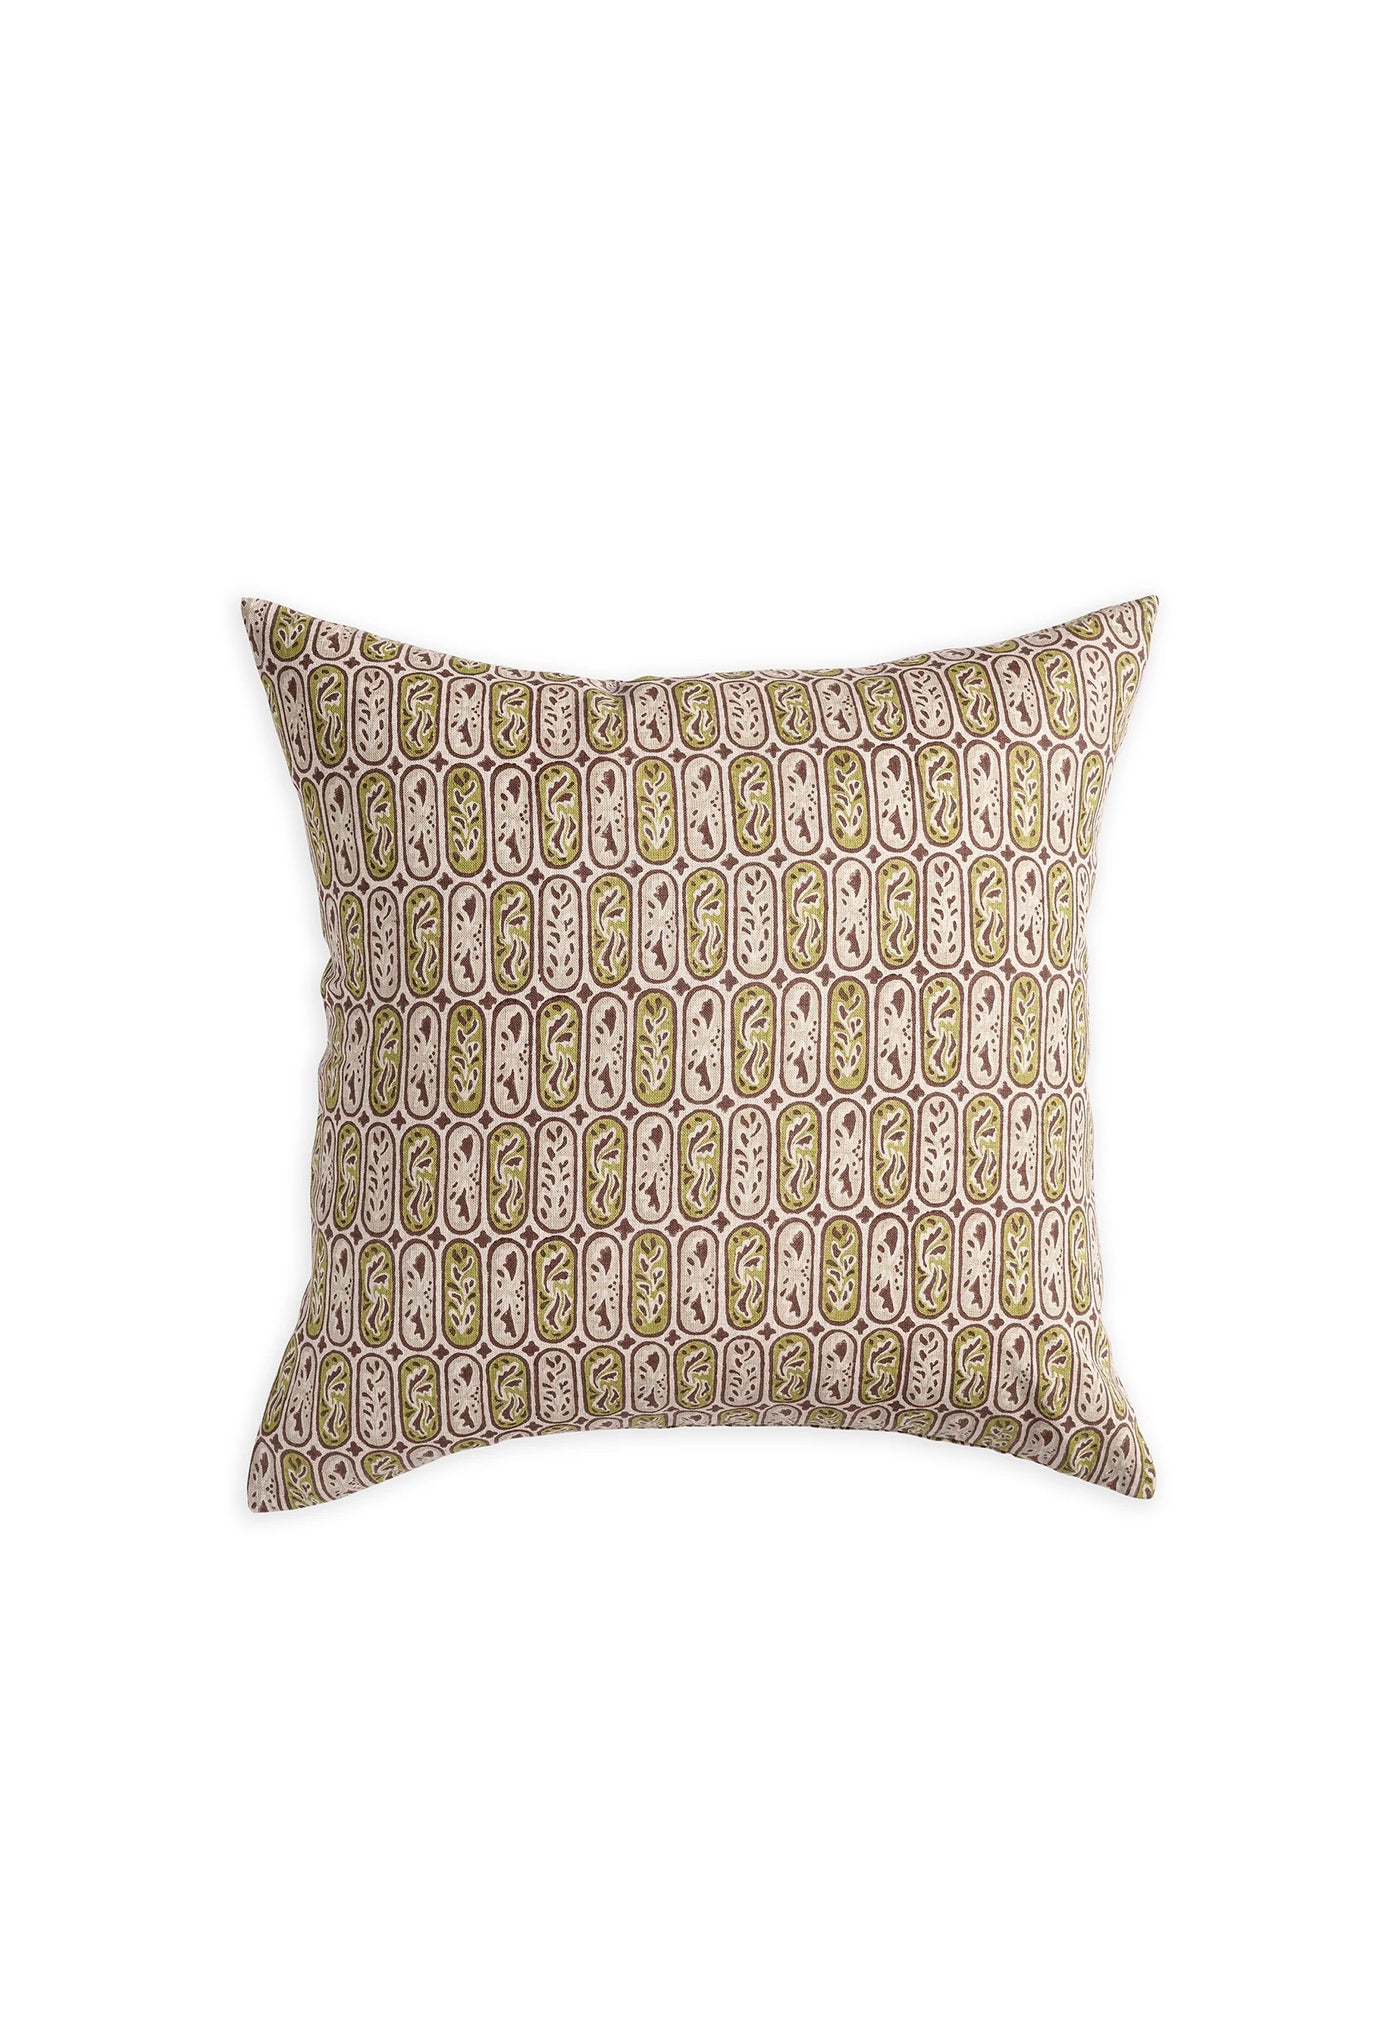 Carezza Shell Linen Cushion 50x50cm sold by Angel Divine